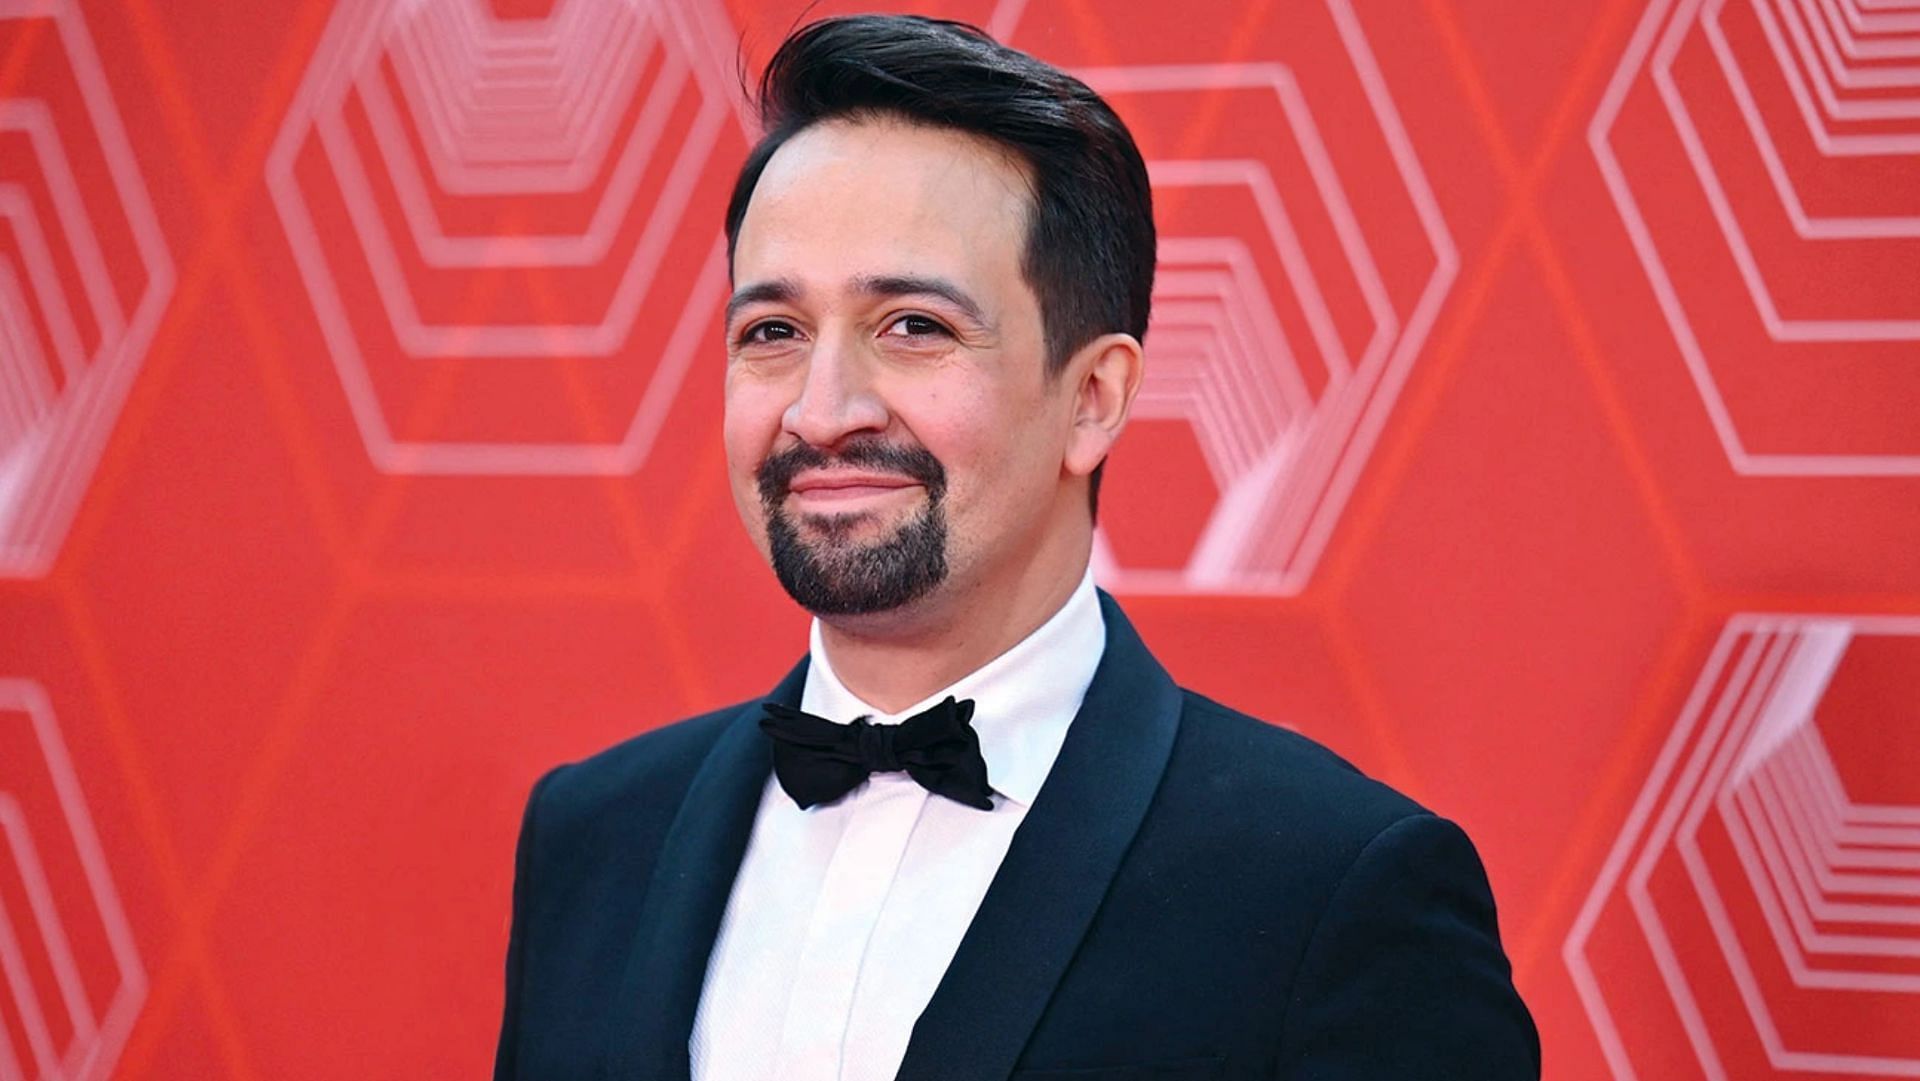 Lin Manuel Miranda will play the role of Hermes in the upcoming Percy Jackson series. (Image via Angela Weiss)